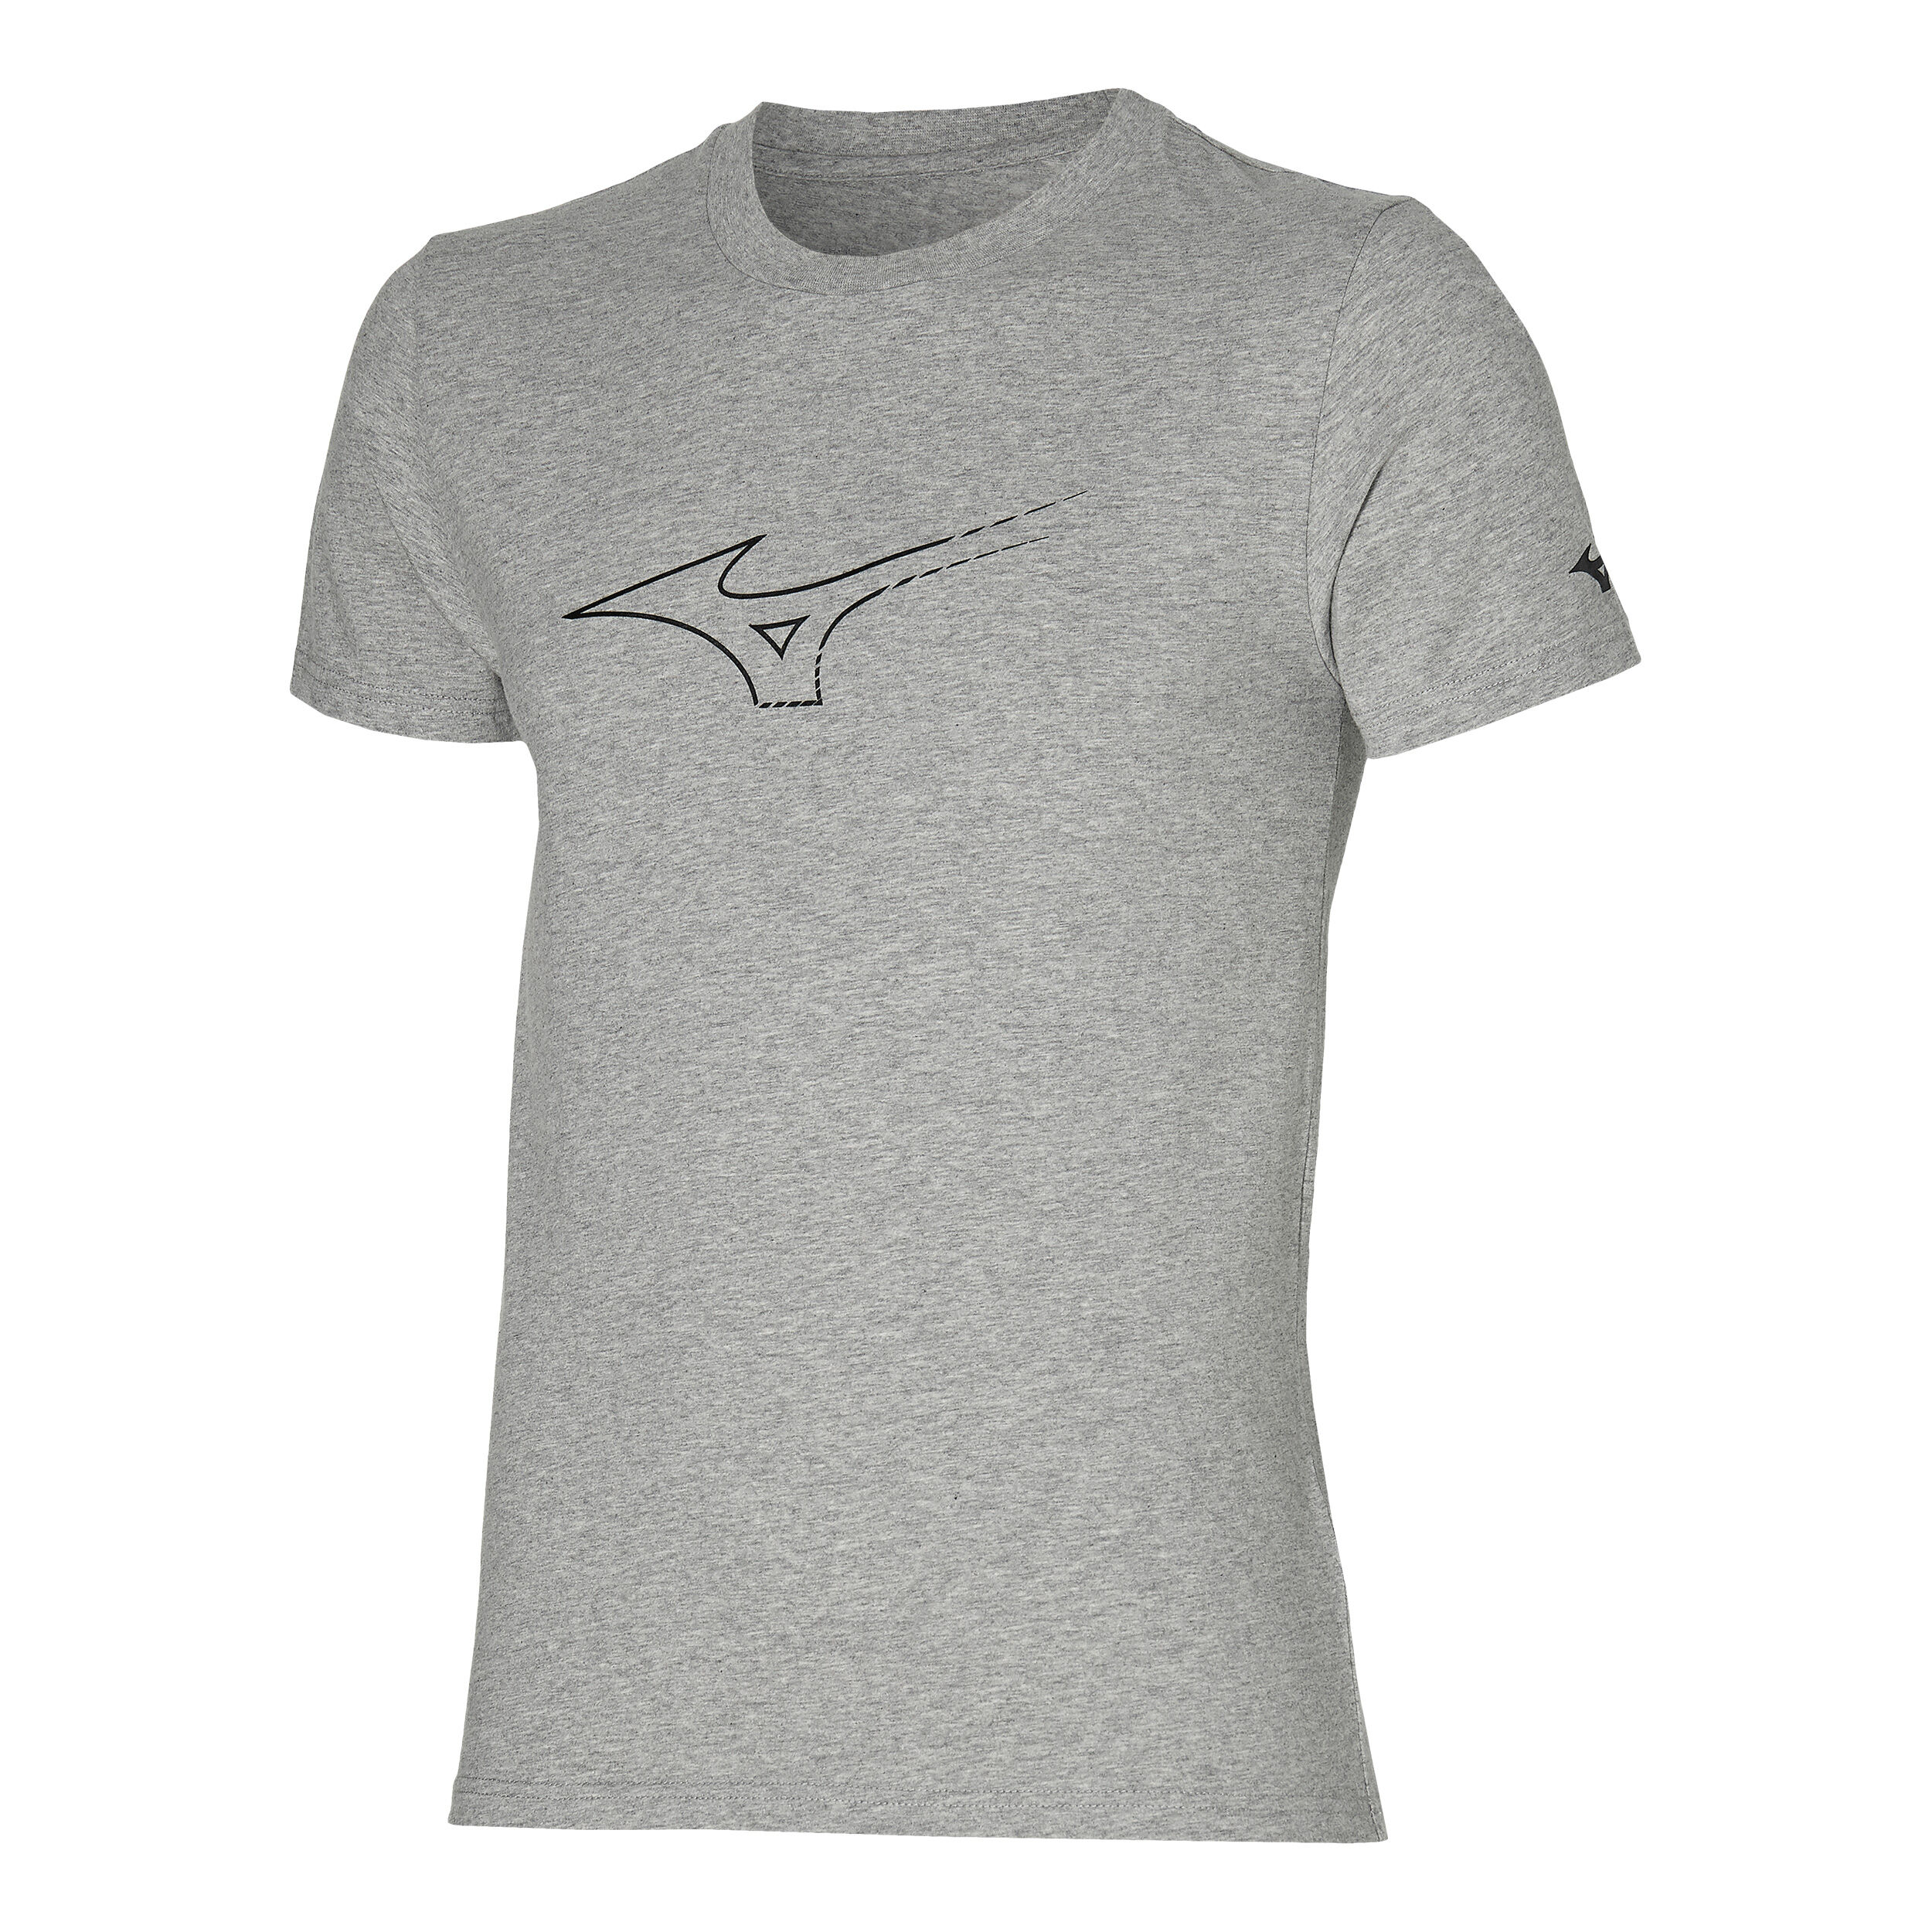 Mizuno Mens Athletic RB T Shirt Tee Top Grey Sports Running Gym Breathable 